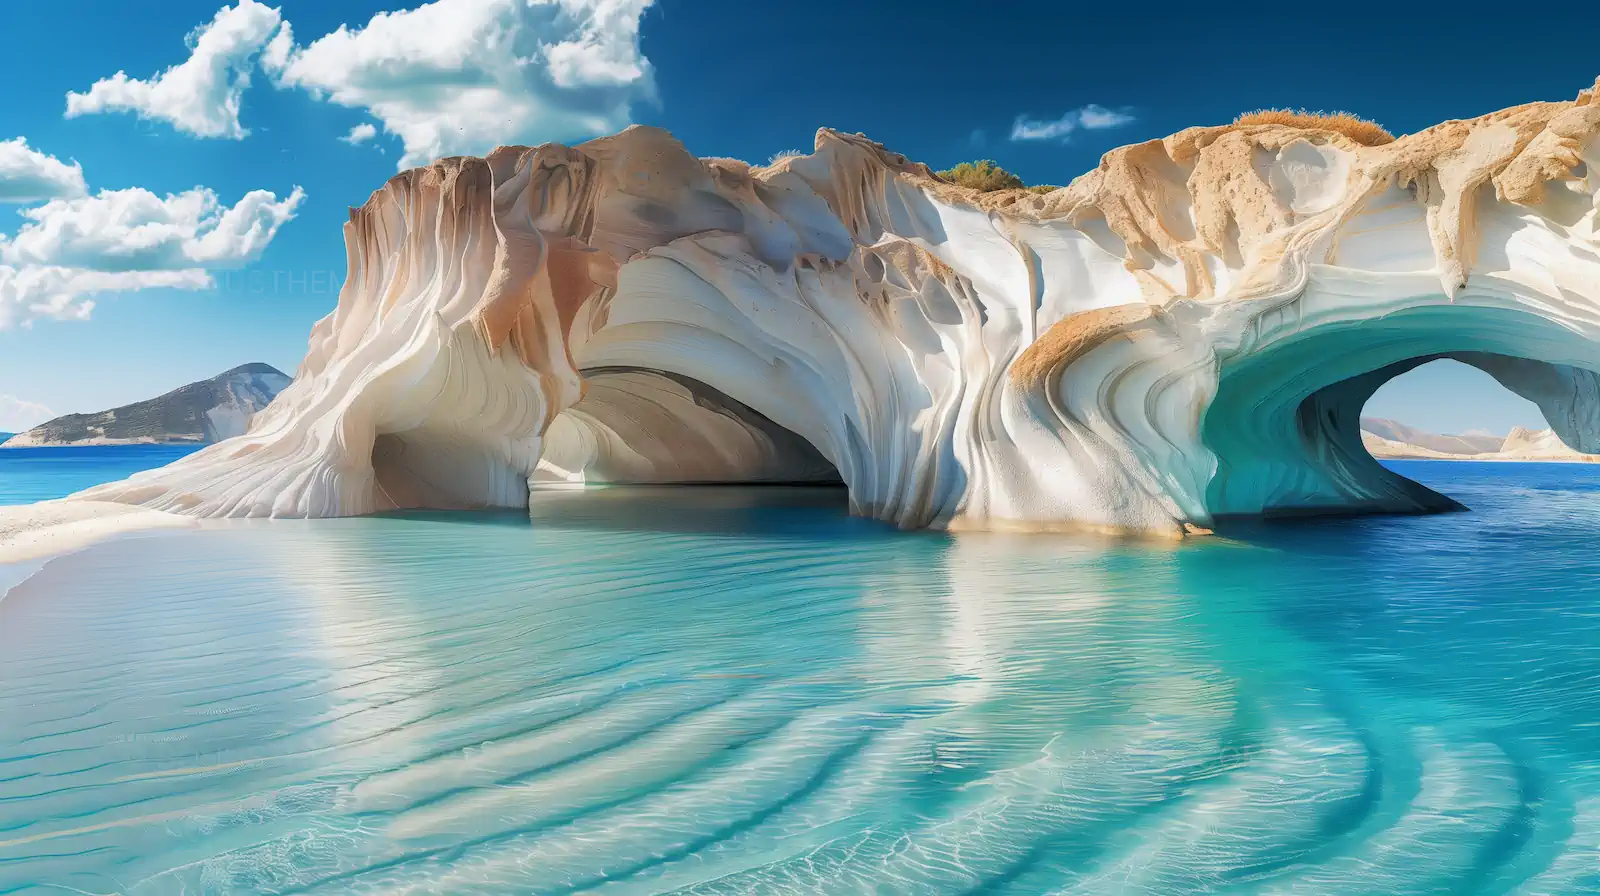 Milos island marvel, azure waters and marble arches